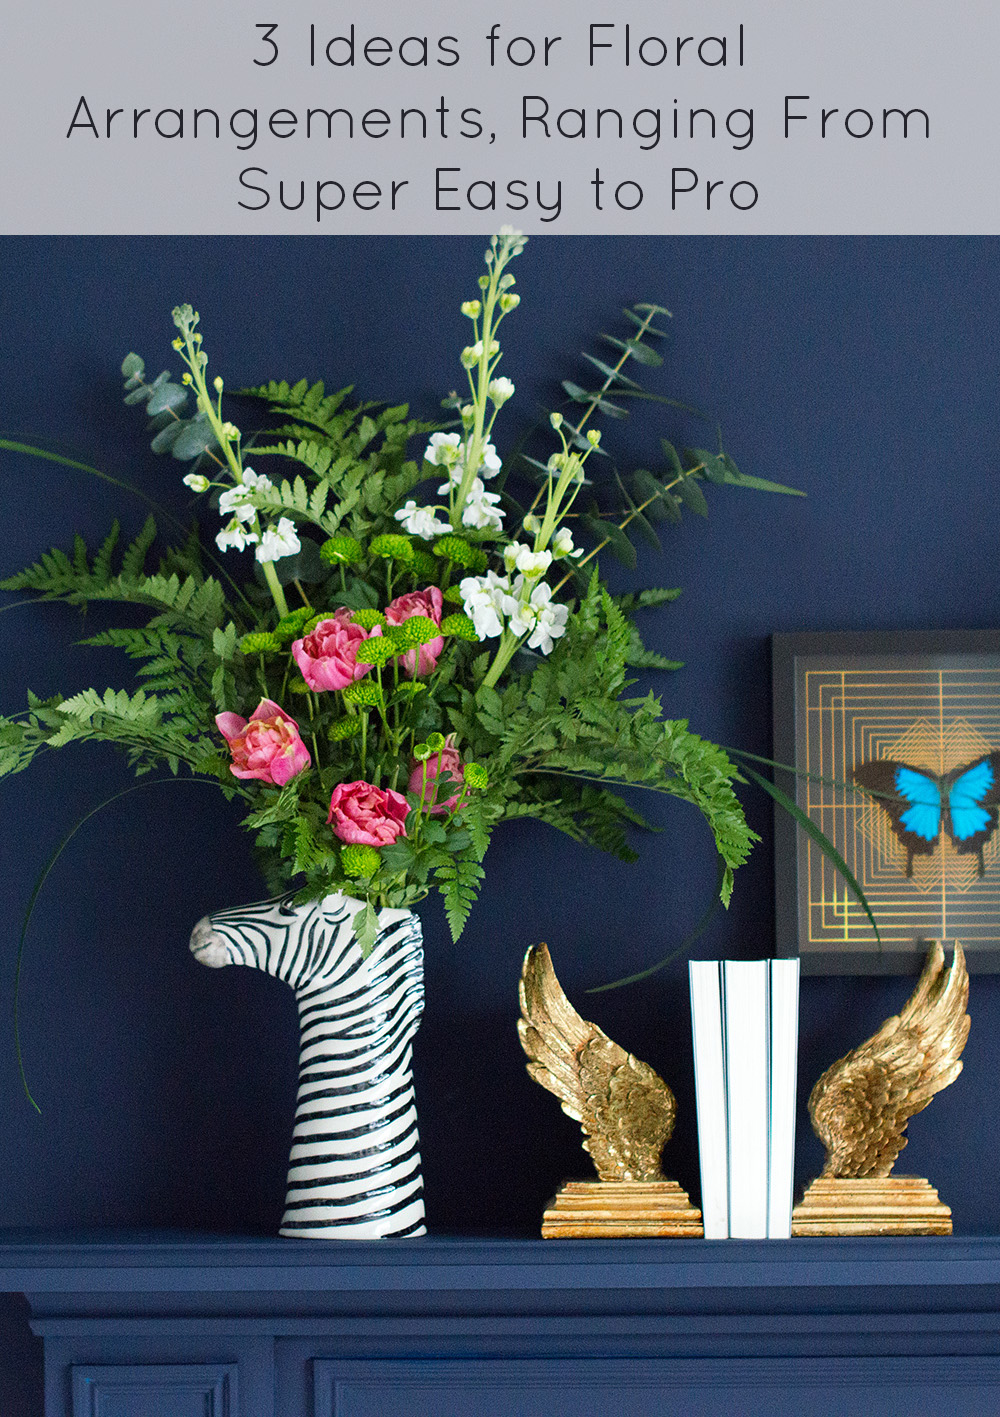 He is such a handsome chap this zebra vase that he doesn’t even need flowers to make a statement, but he certainly creates real wow factor when filled with floral loveliness. To give you some tips for flower arranging in the zebra vase we have styled him in 3 different ways so you can see how different he looks.